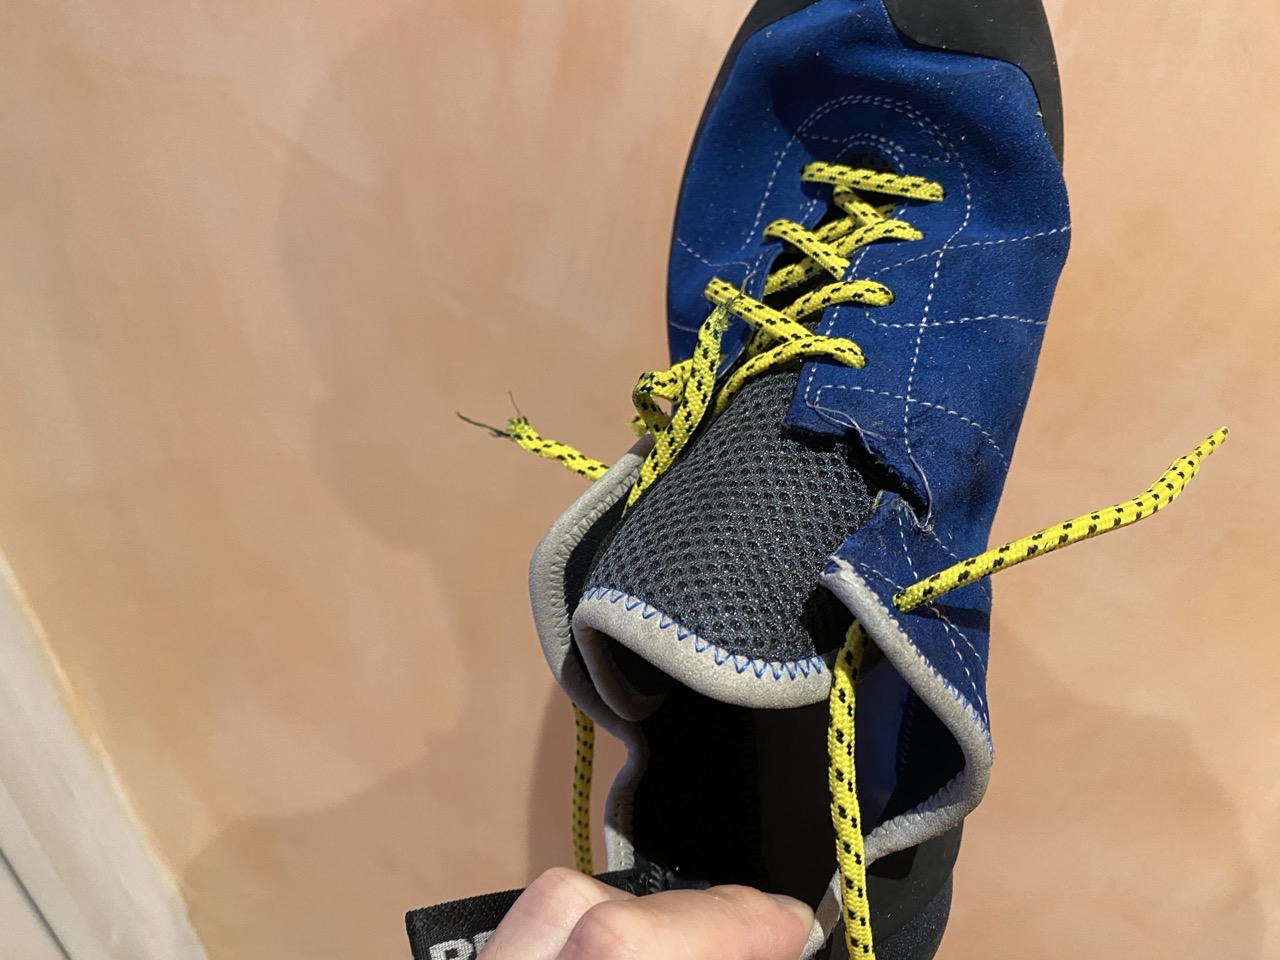 A blue climbing shoe. It’s been ripped on the side and one of the laces is torn.